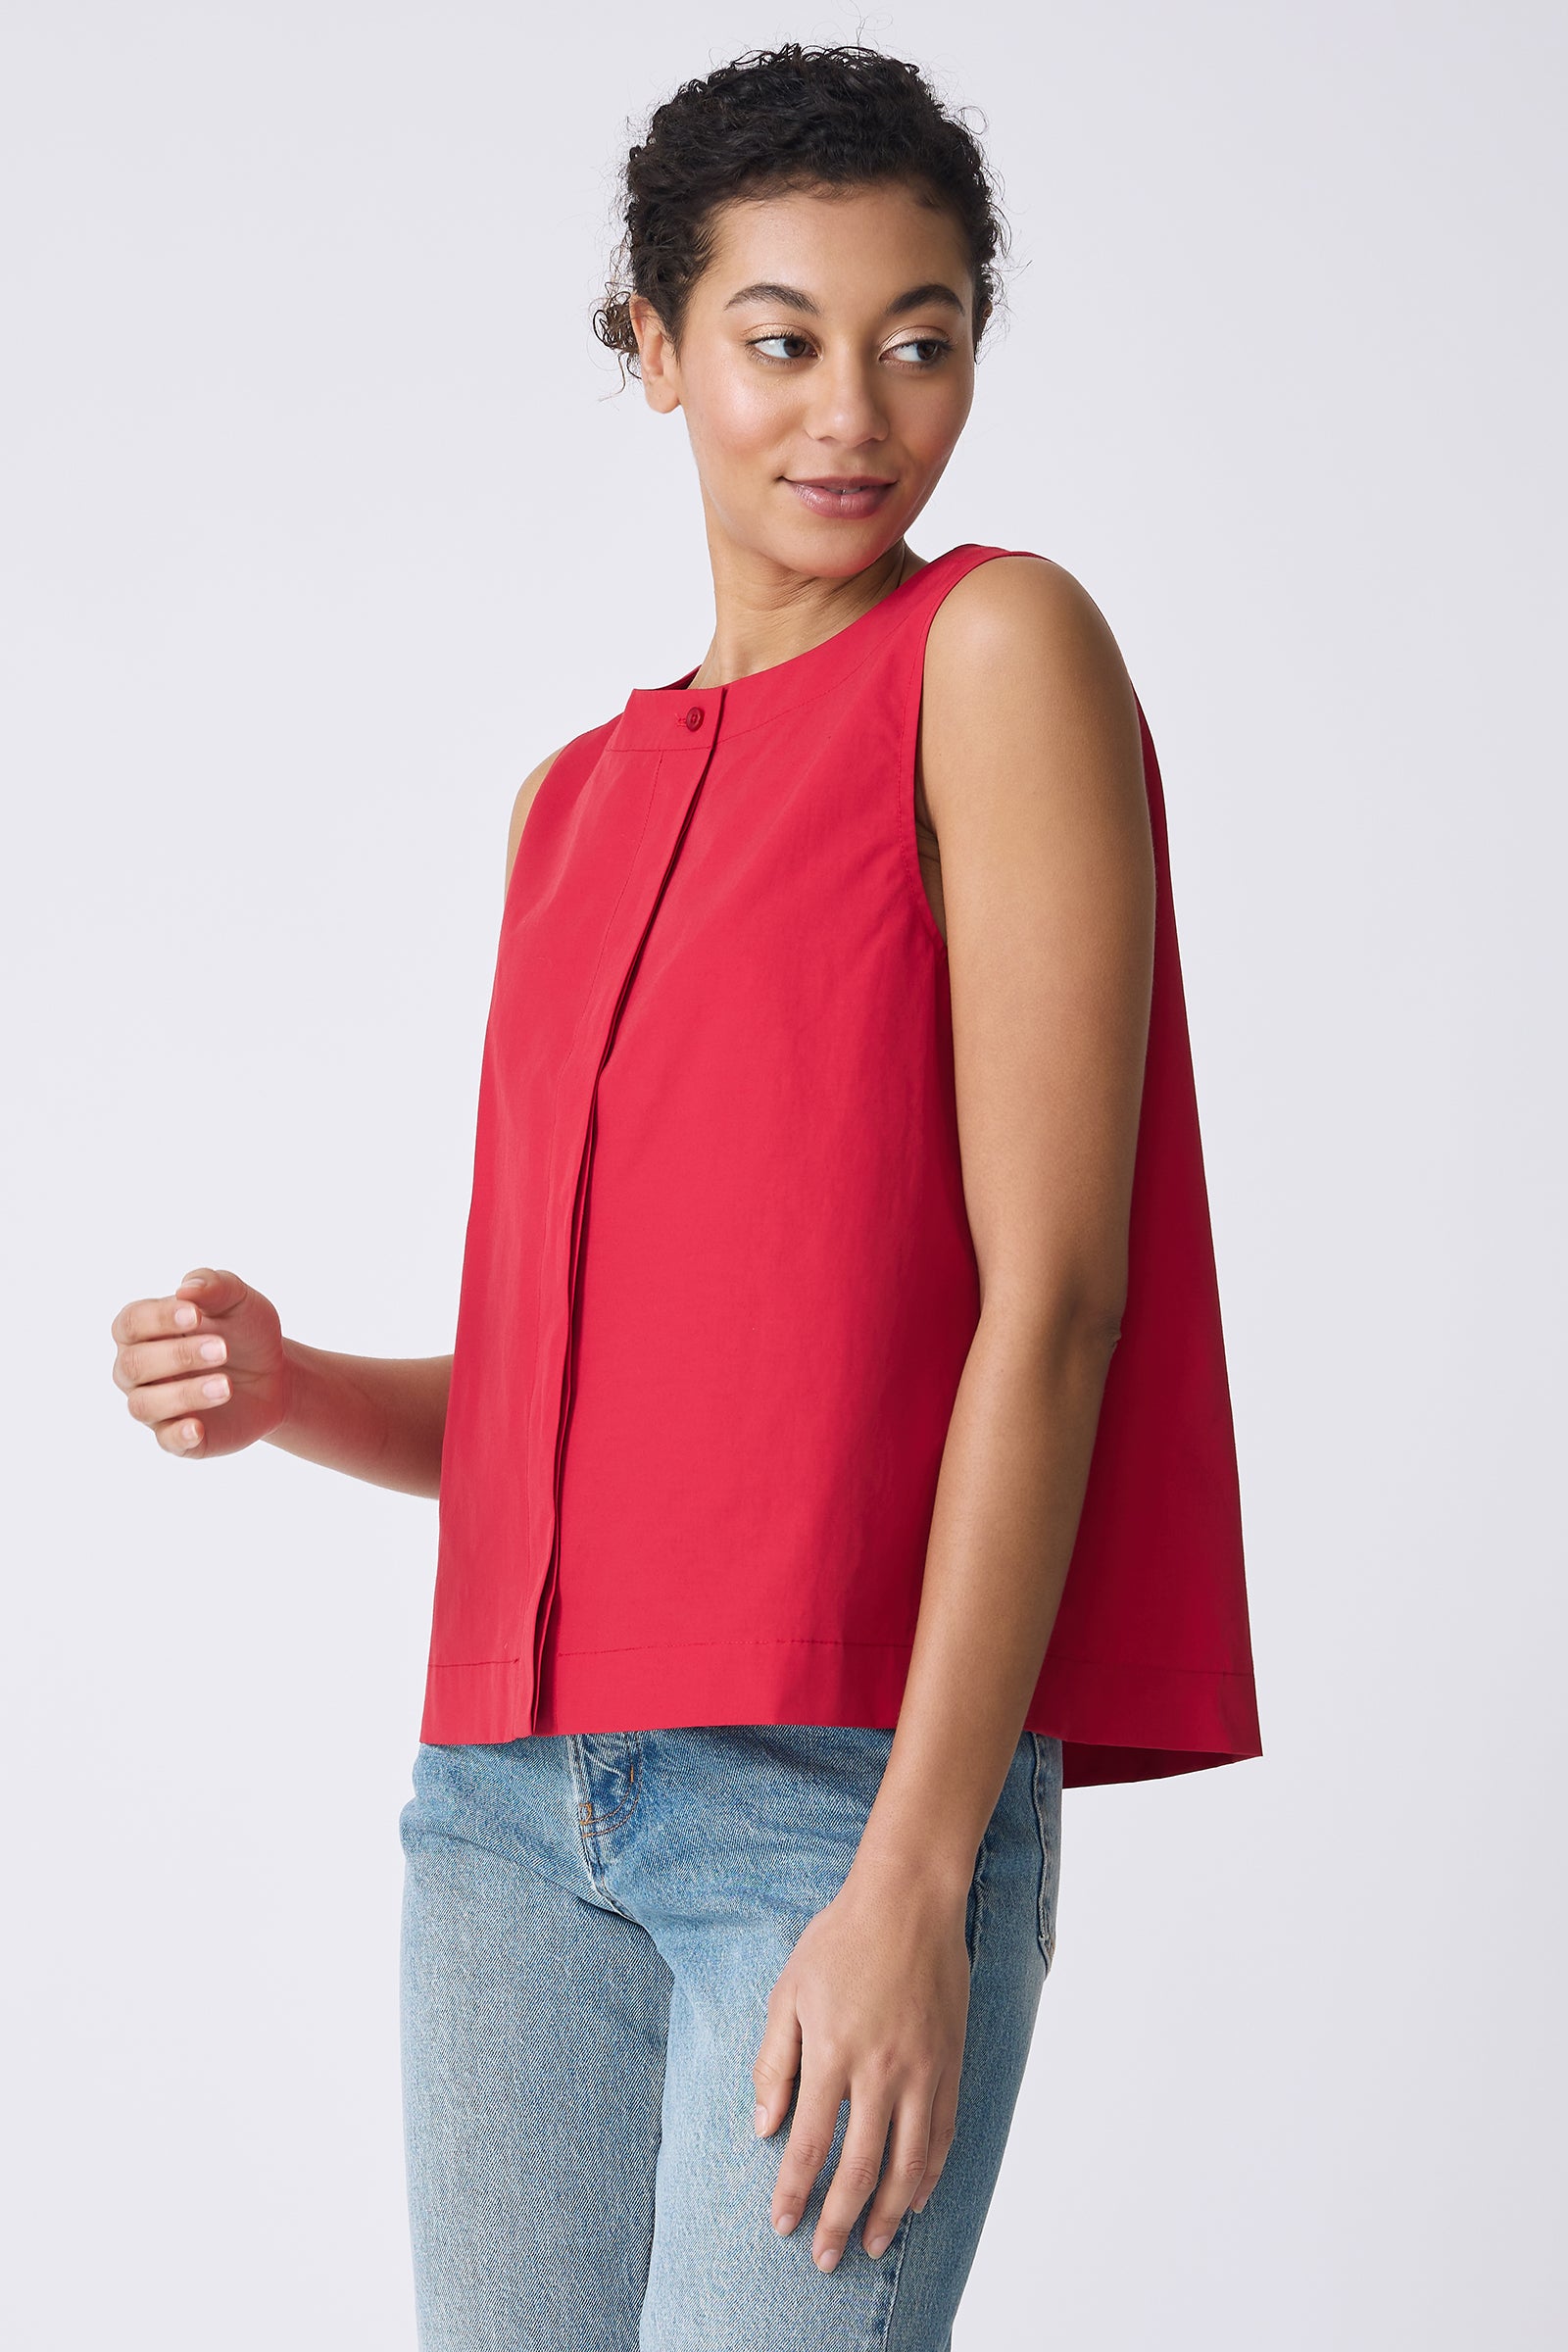 Kal Rieman Colette Shell Top in Red on model looking left front side view